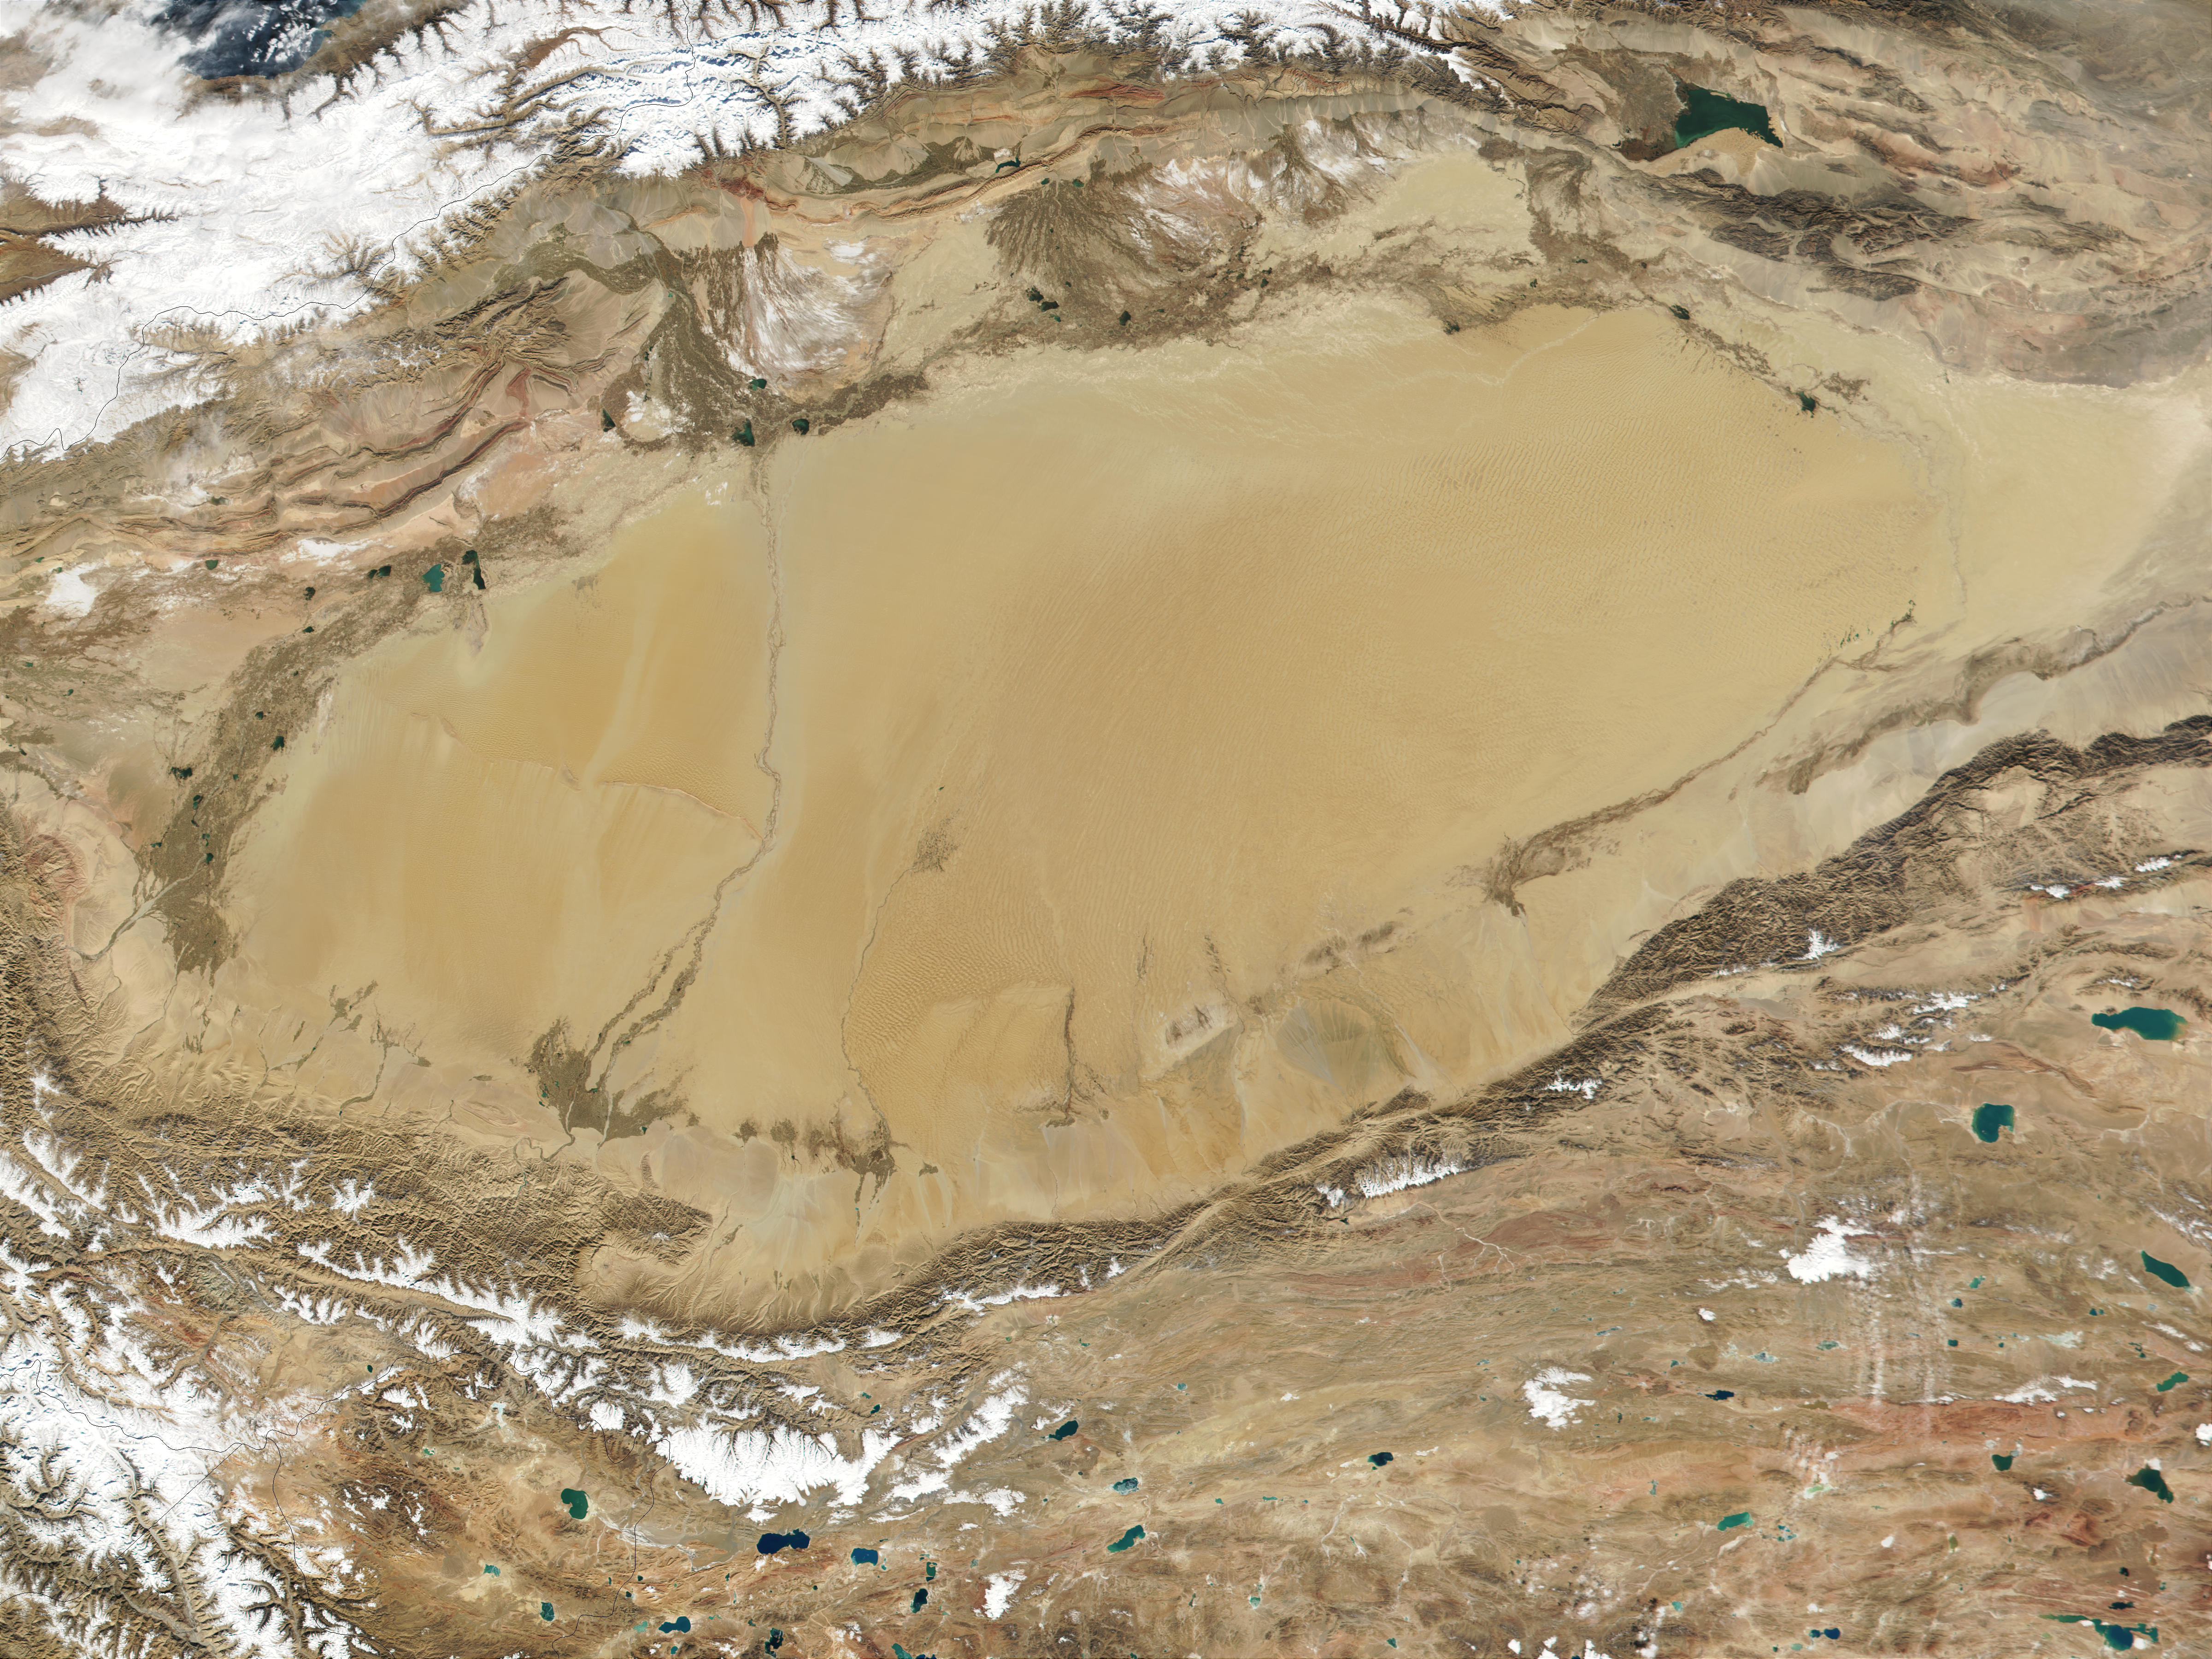 Taklimakan desert, western China - related image preview